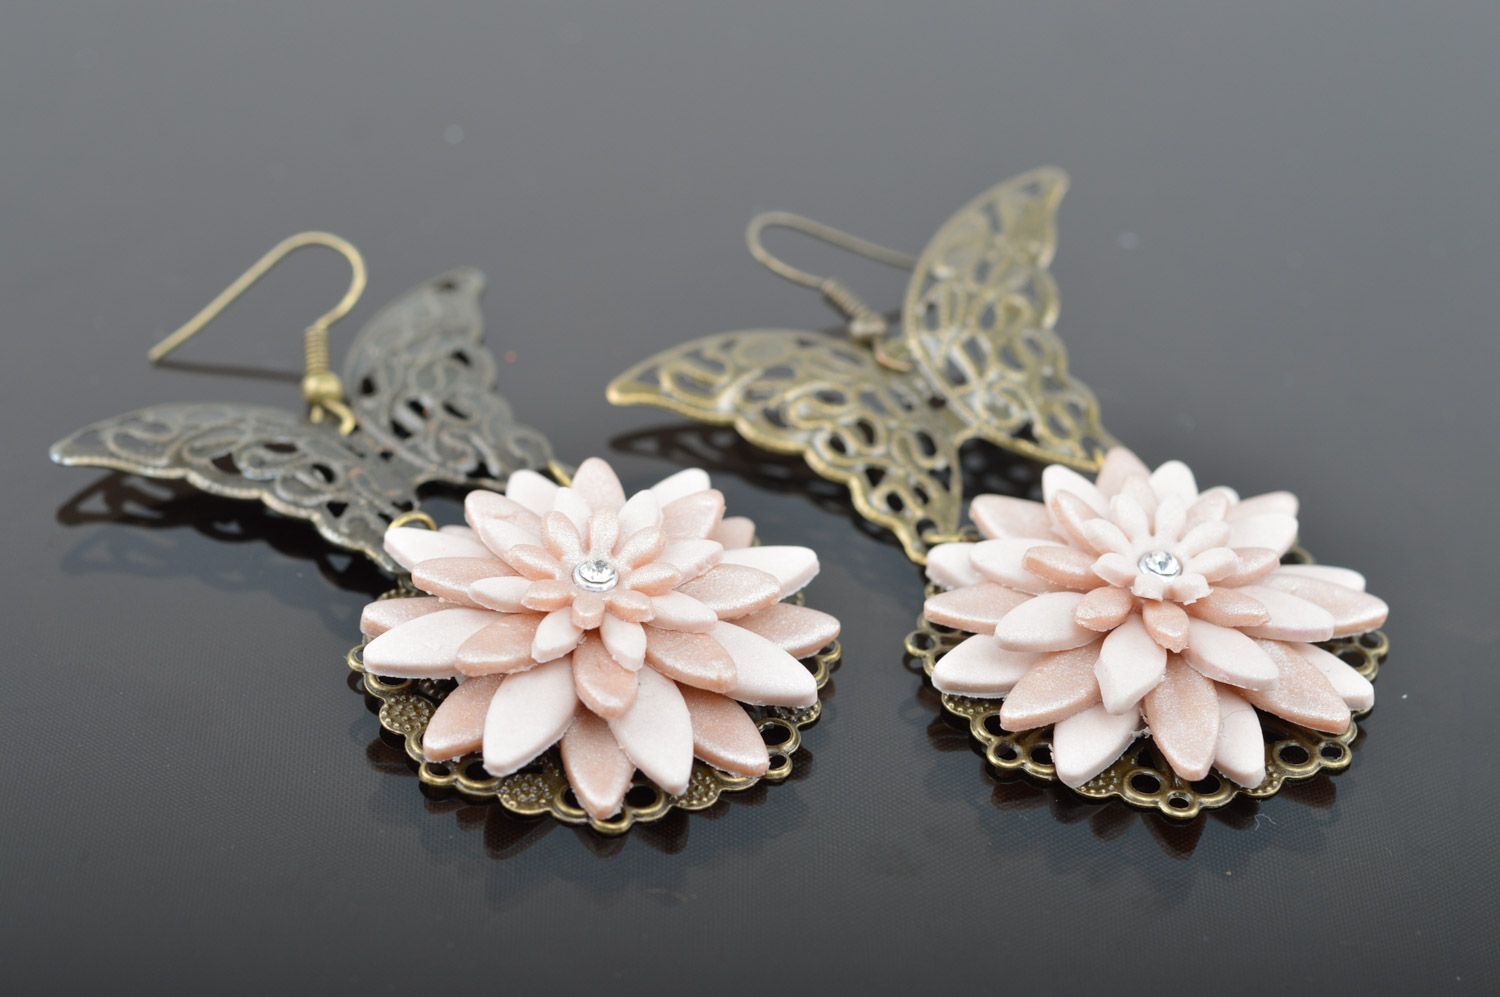 Handmade women's plastic earrings with charms in the shape of butterflies on aster flowers photo 3